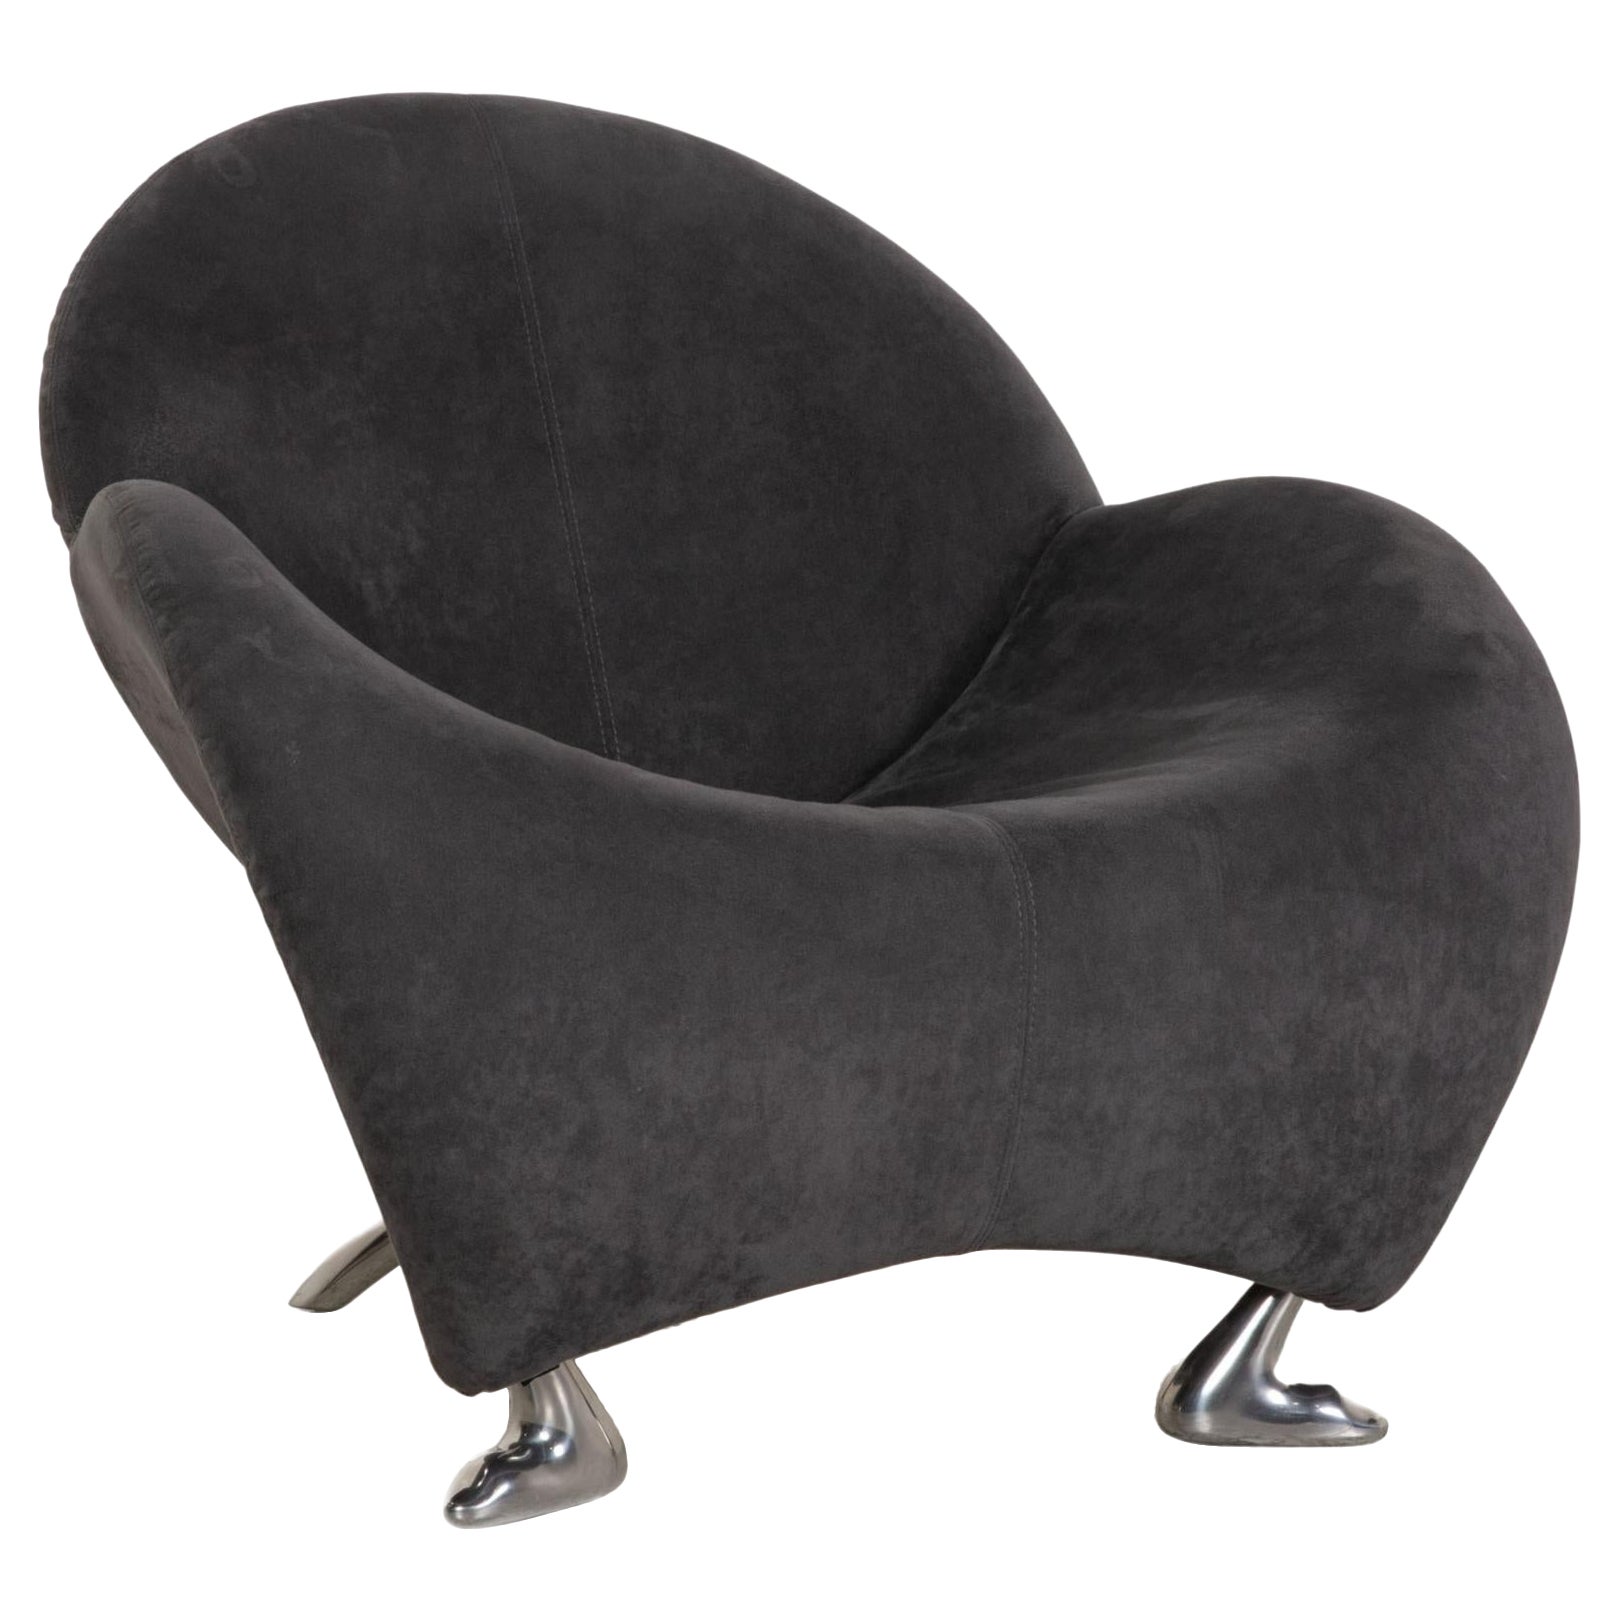 leolux-leather-armchair-black-for-sale-at-1stdibs